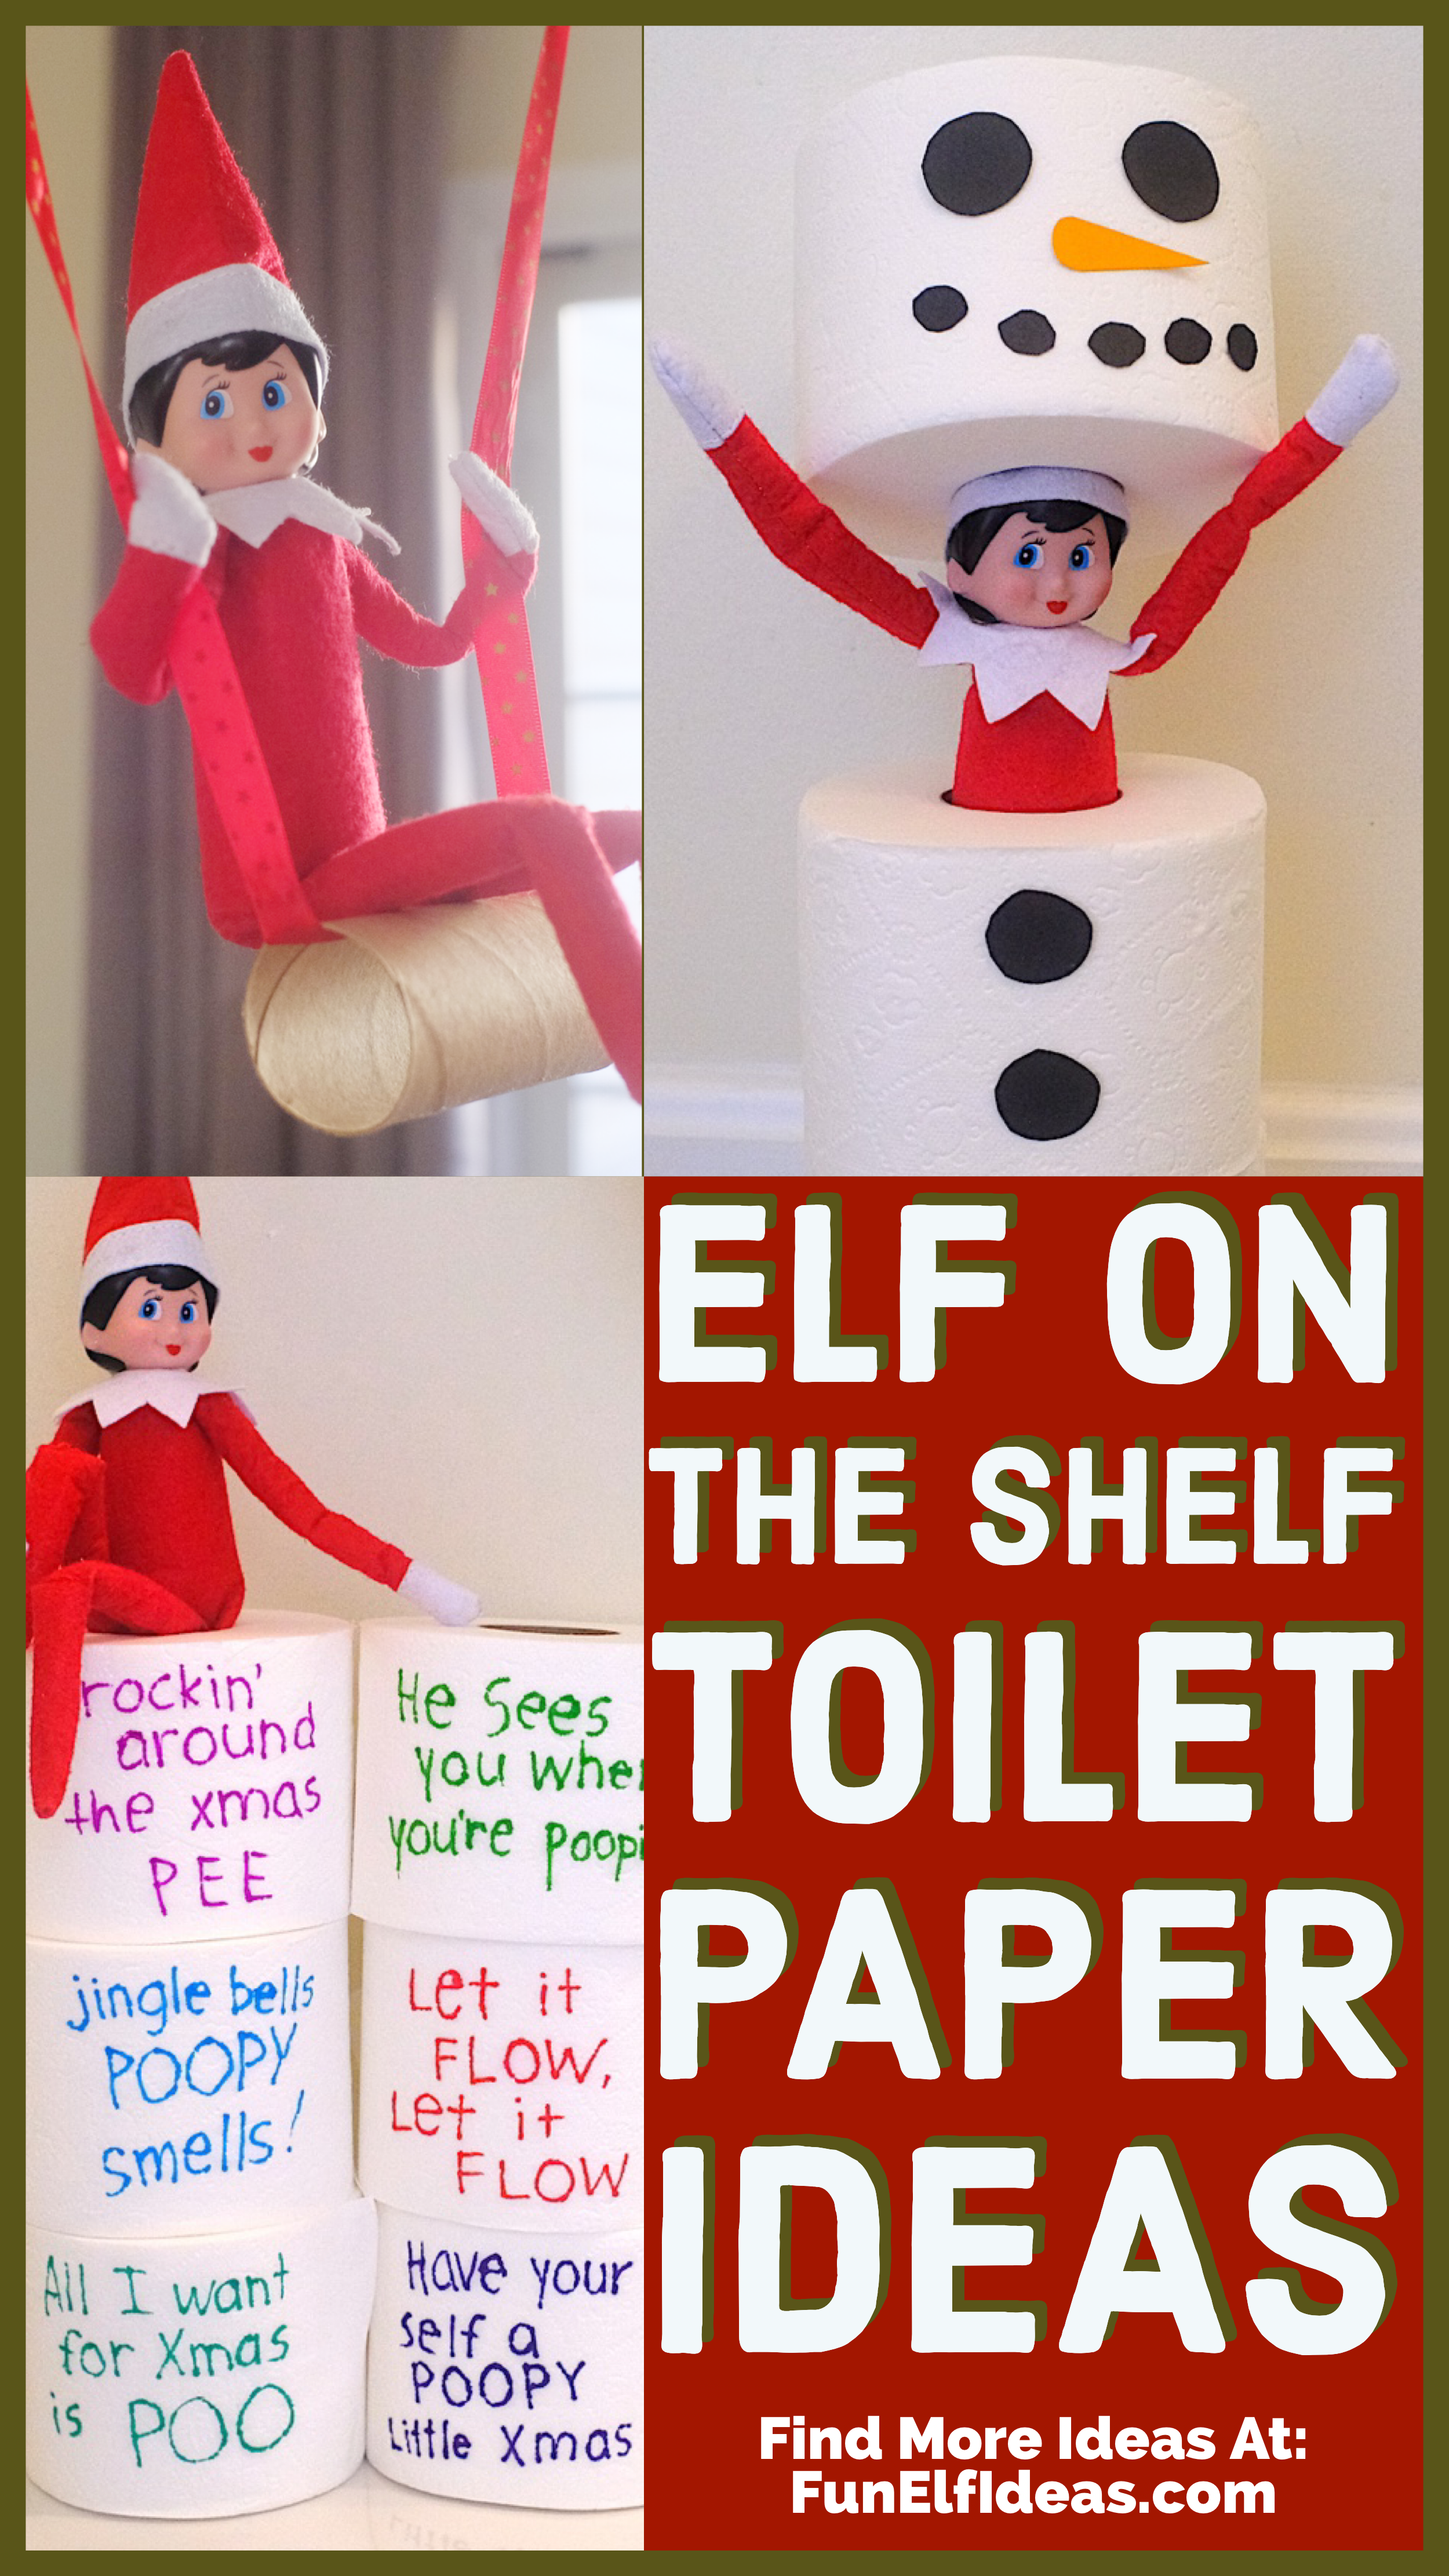 Collage of three pictures of elf on the shelf dolls using toilet paper in funny ways.